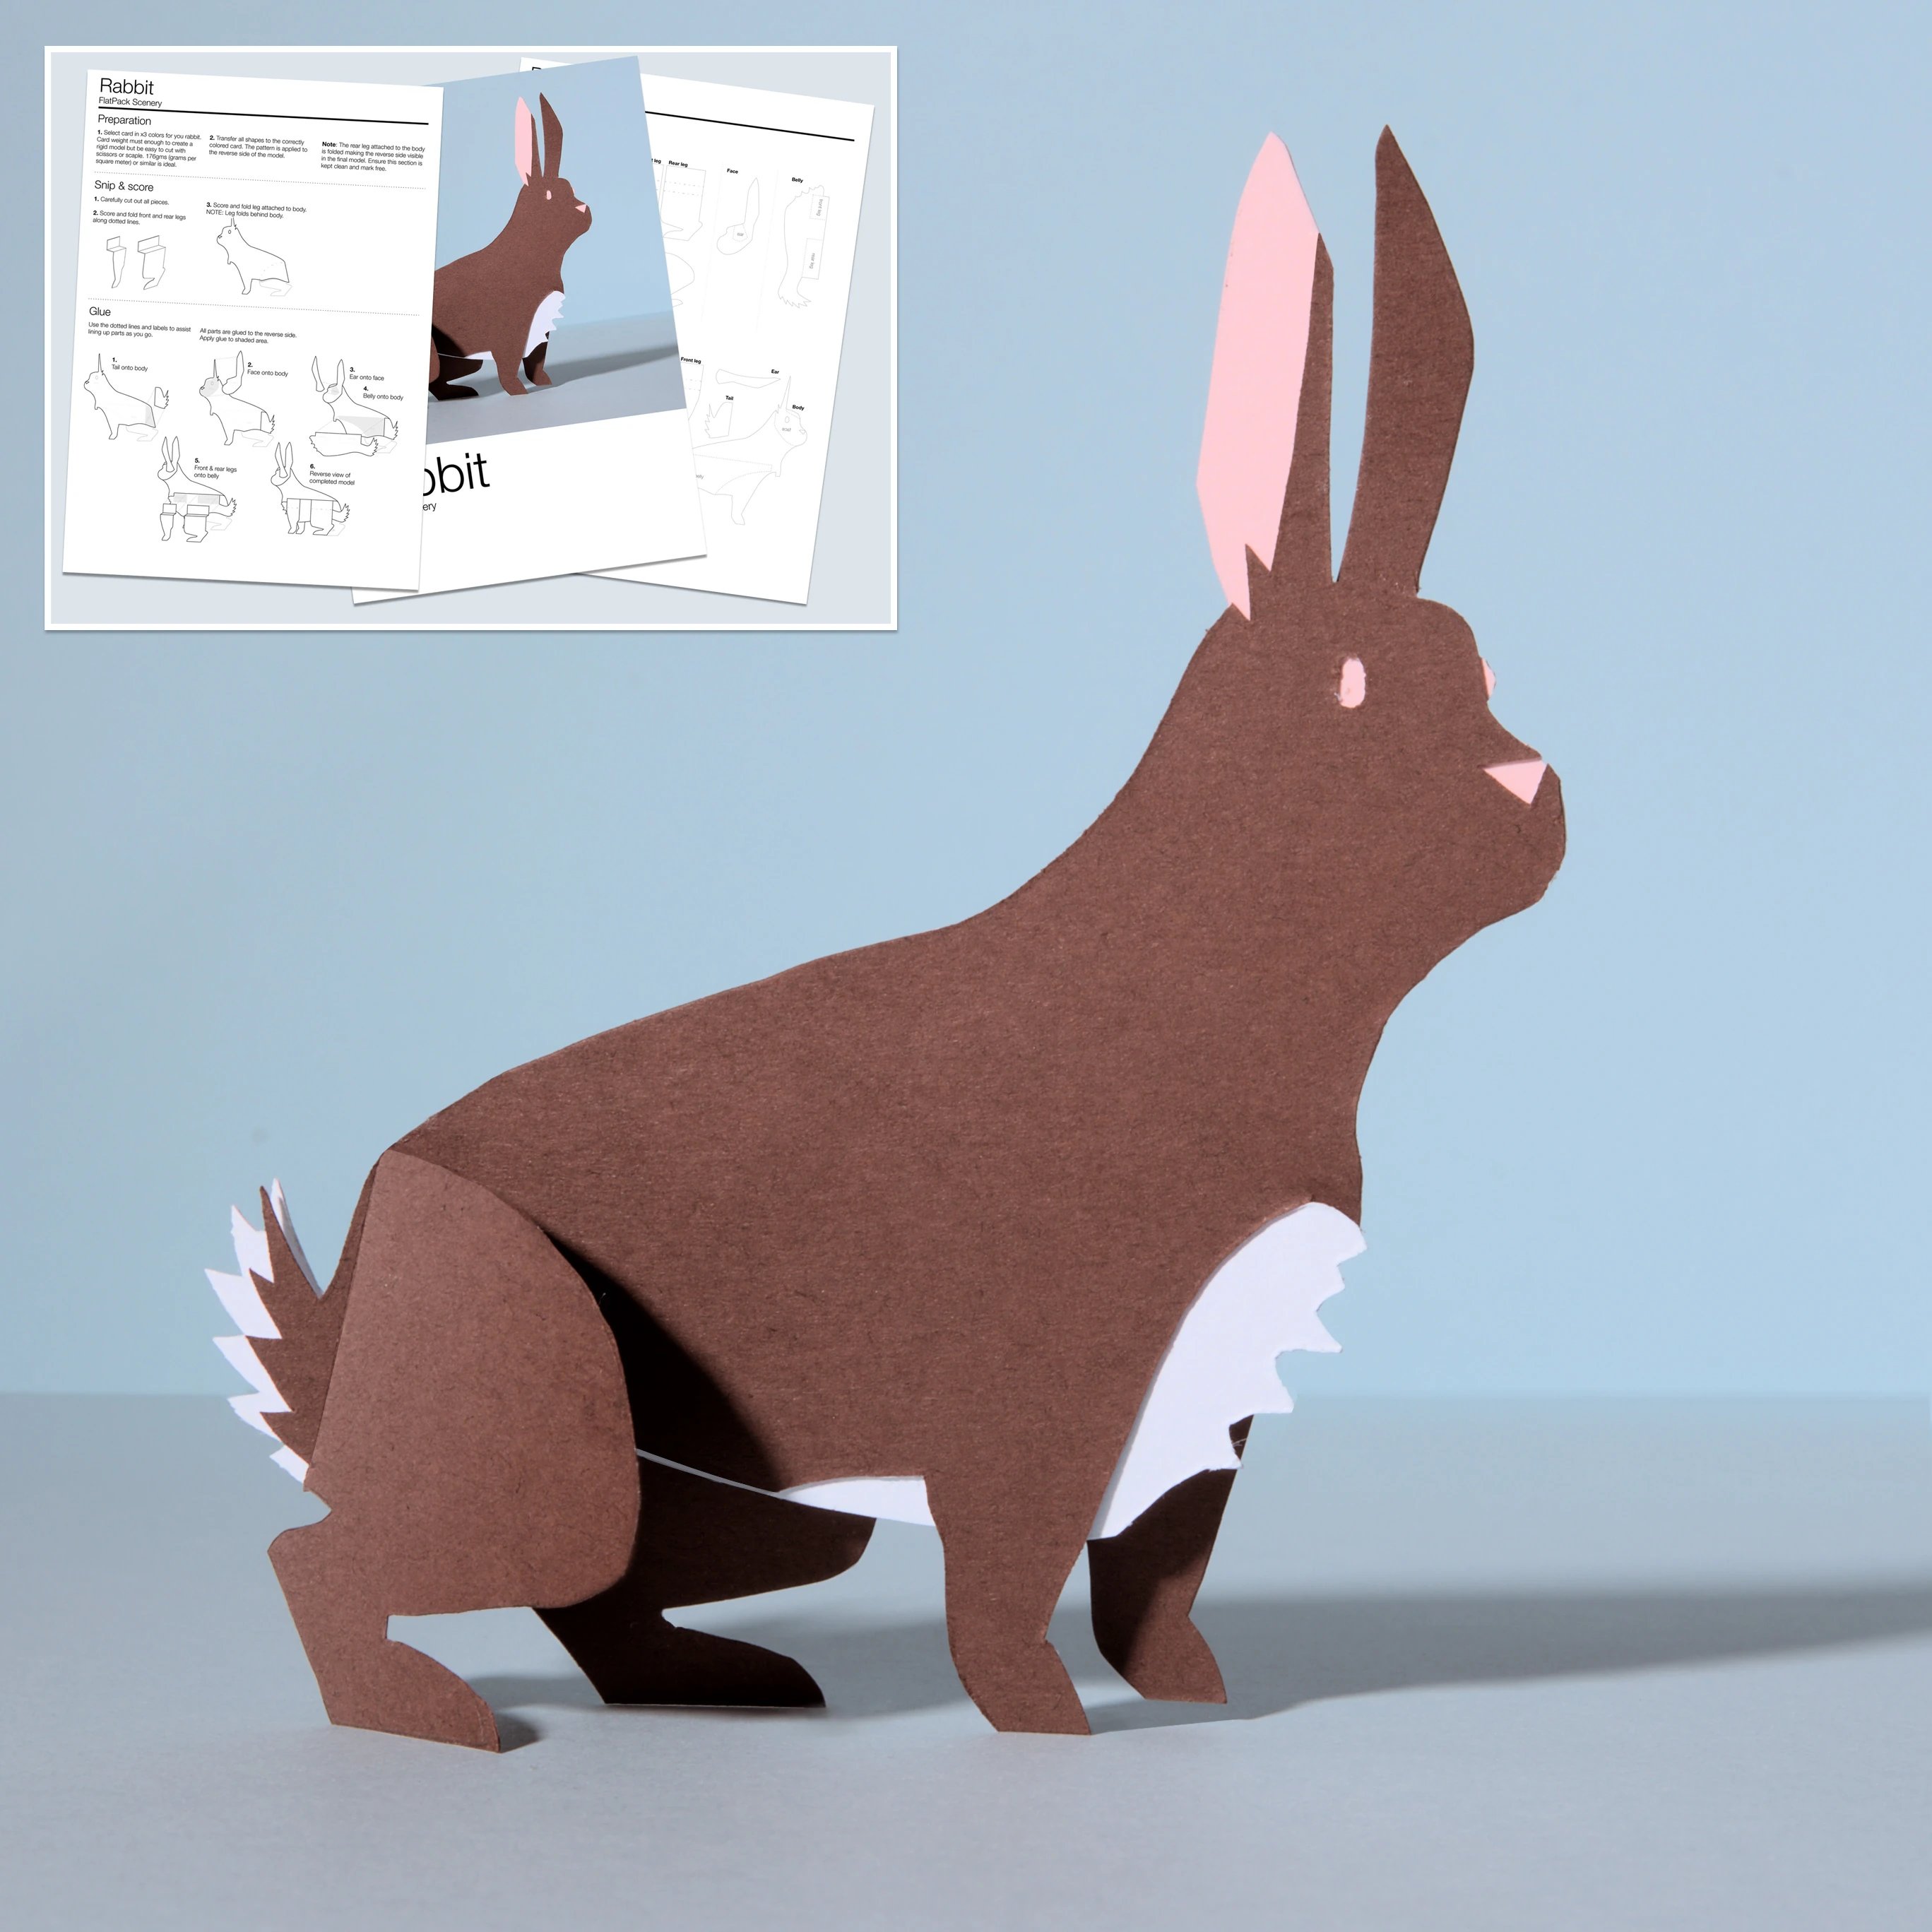 Cute rabbit made from 3 pieces of coloured card. Easy to cut out and assemble to make an adorable desk or shelf buddy.